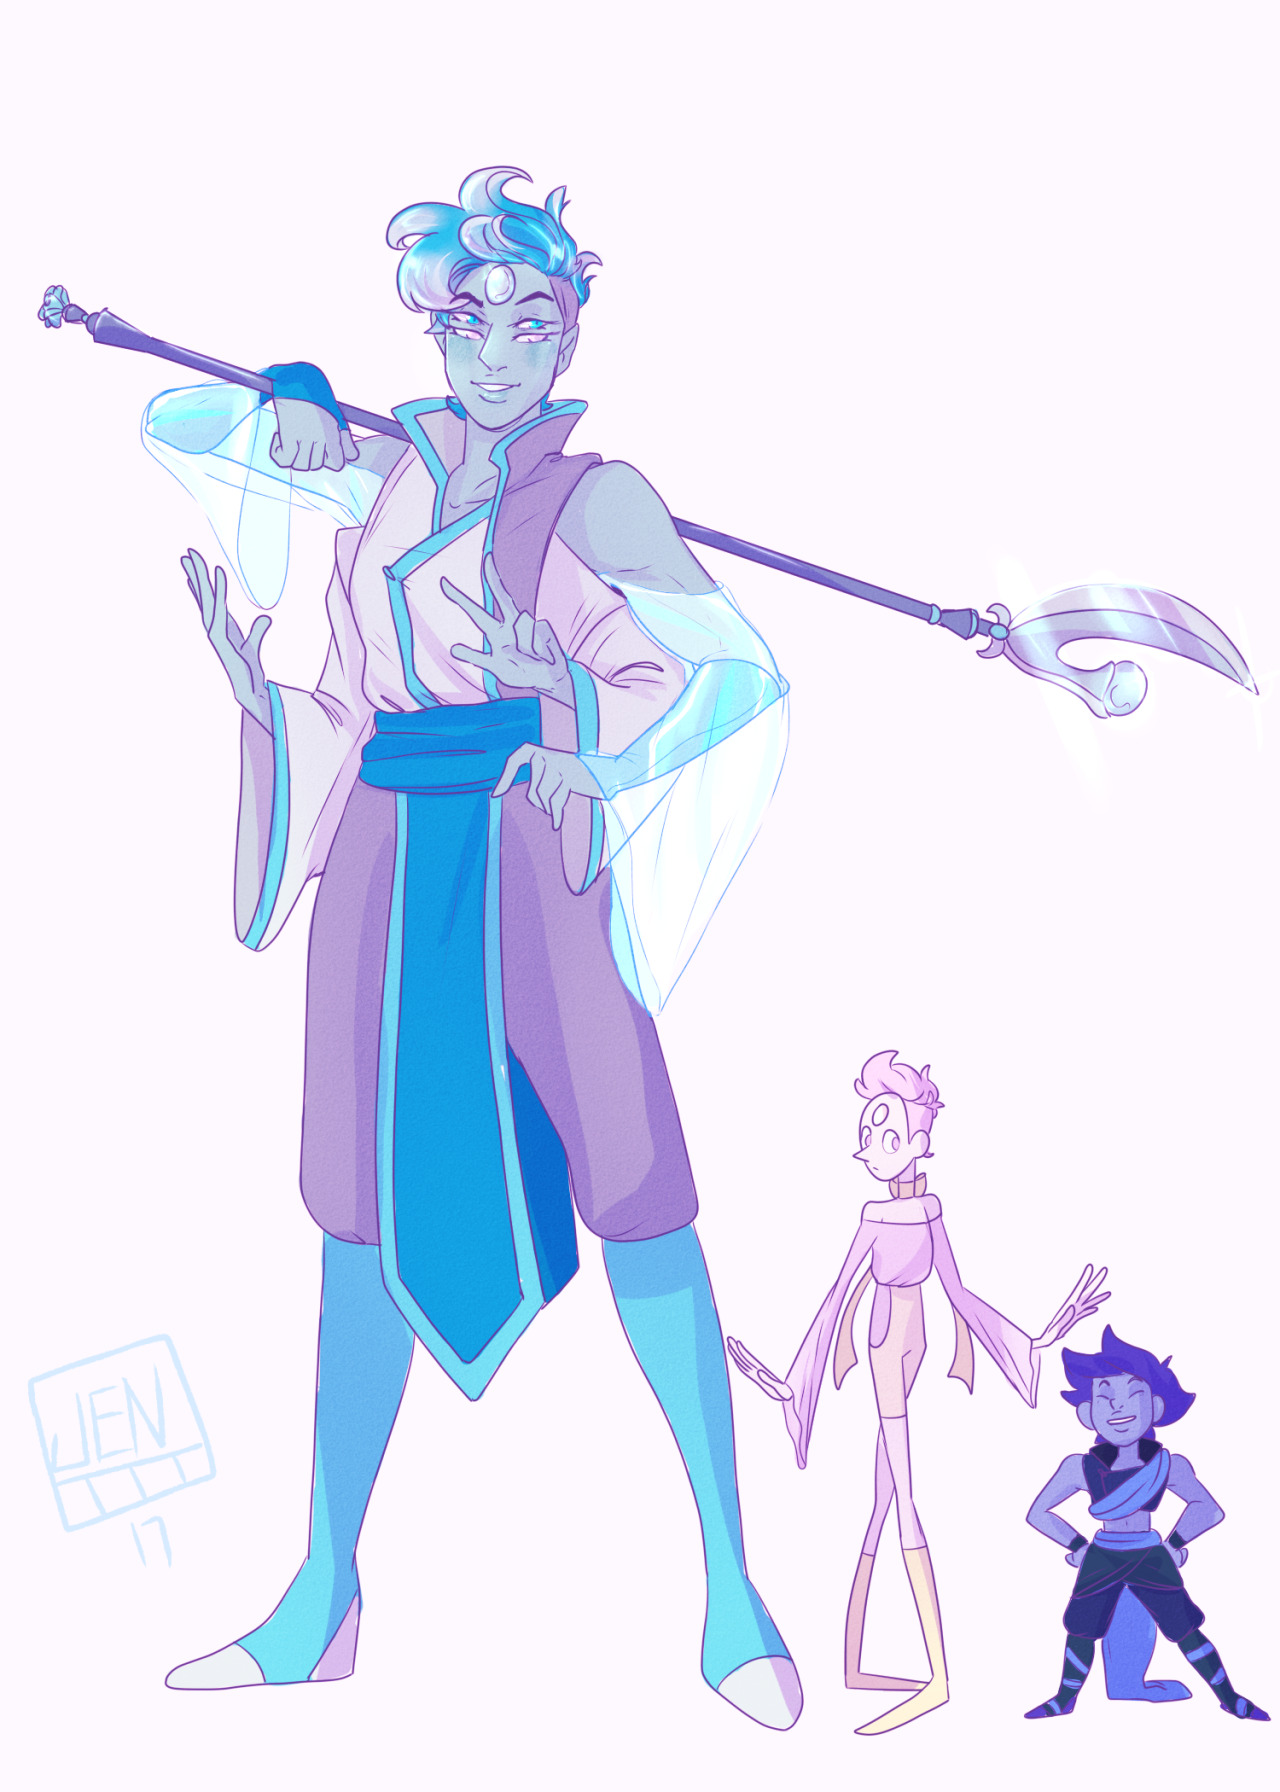 I put all of @l-sula-l and @atta and my gemsona’s fusions in one post~